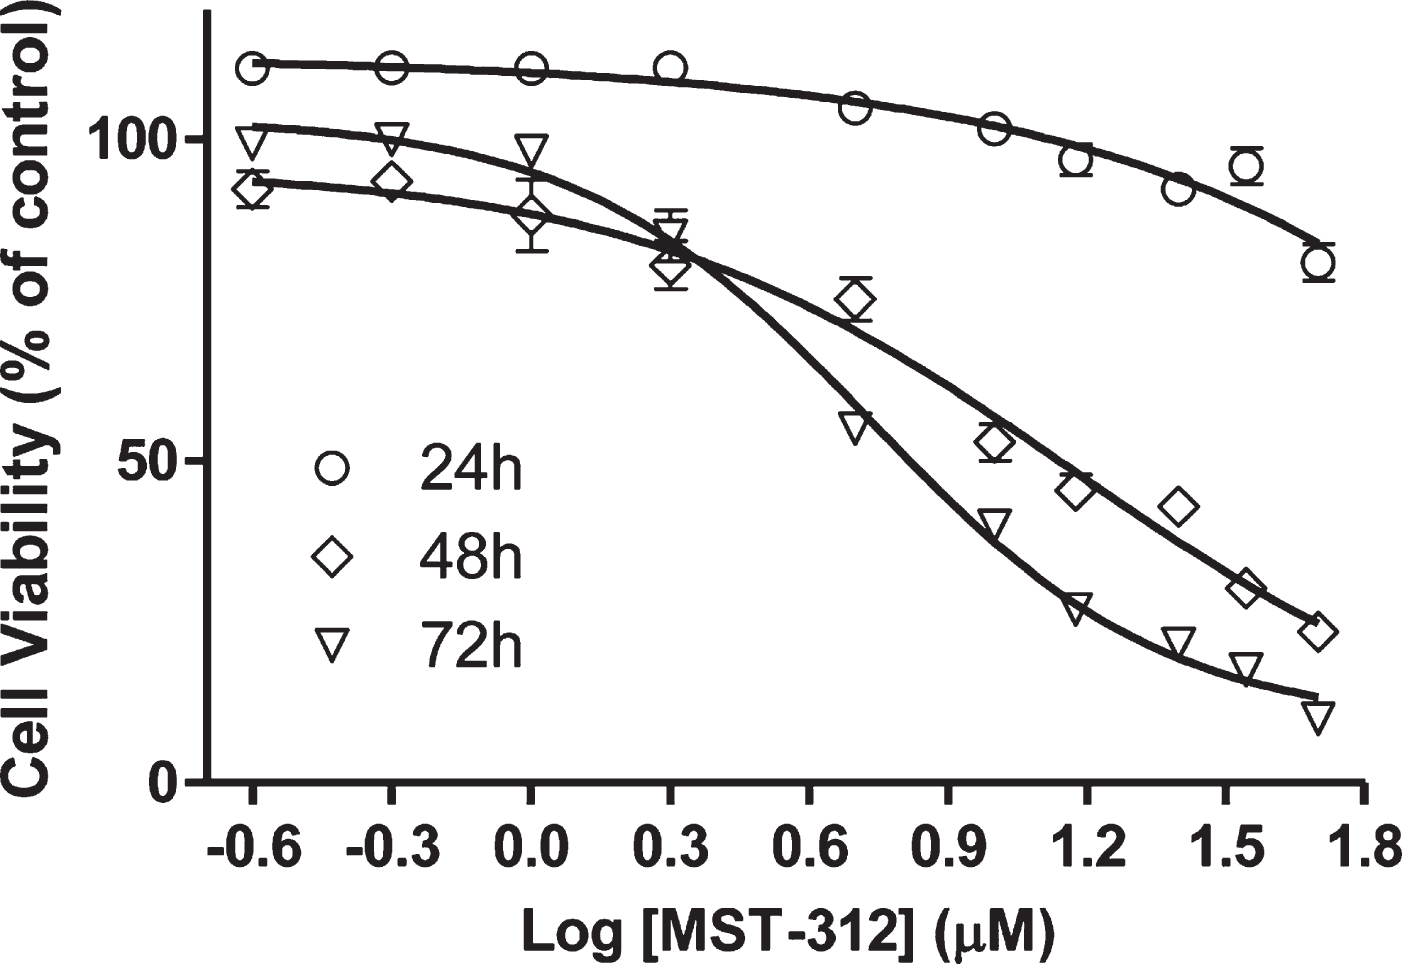 Effects of MST-312 on cell viability. Analysis of cell viability by MTT assay after treatment with MST-312 at increasing concentrations showing a dose-dependent and time-dependent drug toxicity. The IC50 was estimated by non-linear regression. The IC50 and R2 values were 13.88μM / 0.90 and 6.56μM / 0.98 for the 48 h and 72 h curves, respectively. It was not possible to calculate the IC50 for the 24 h curve due to the low toxicity in these conditions.